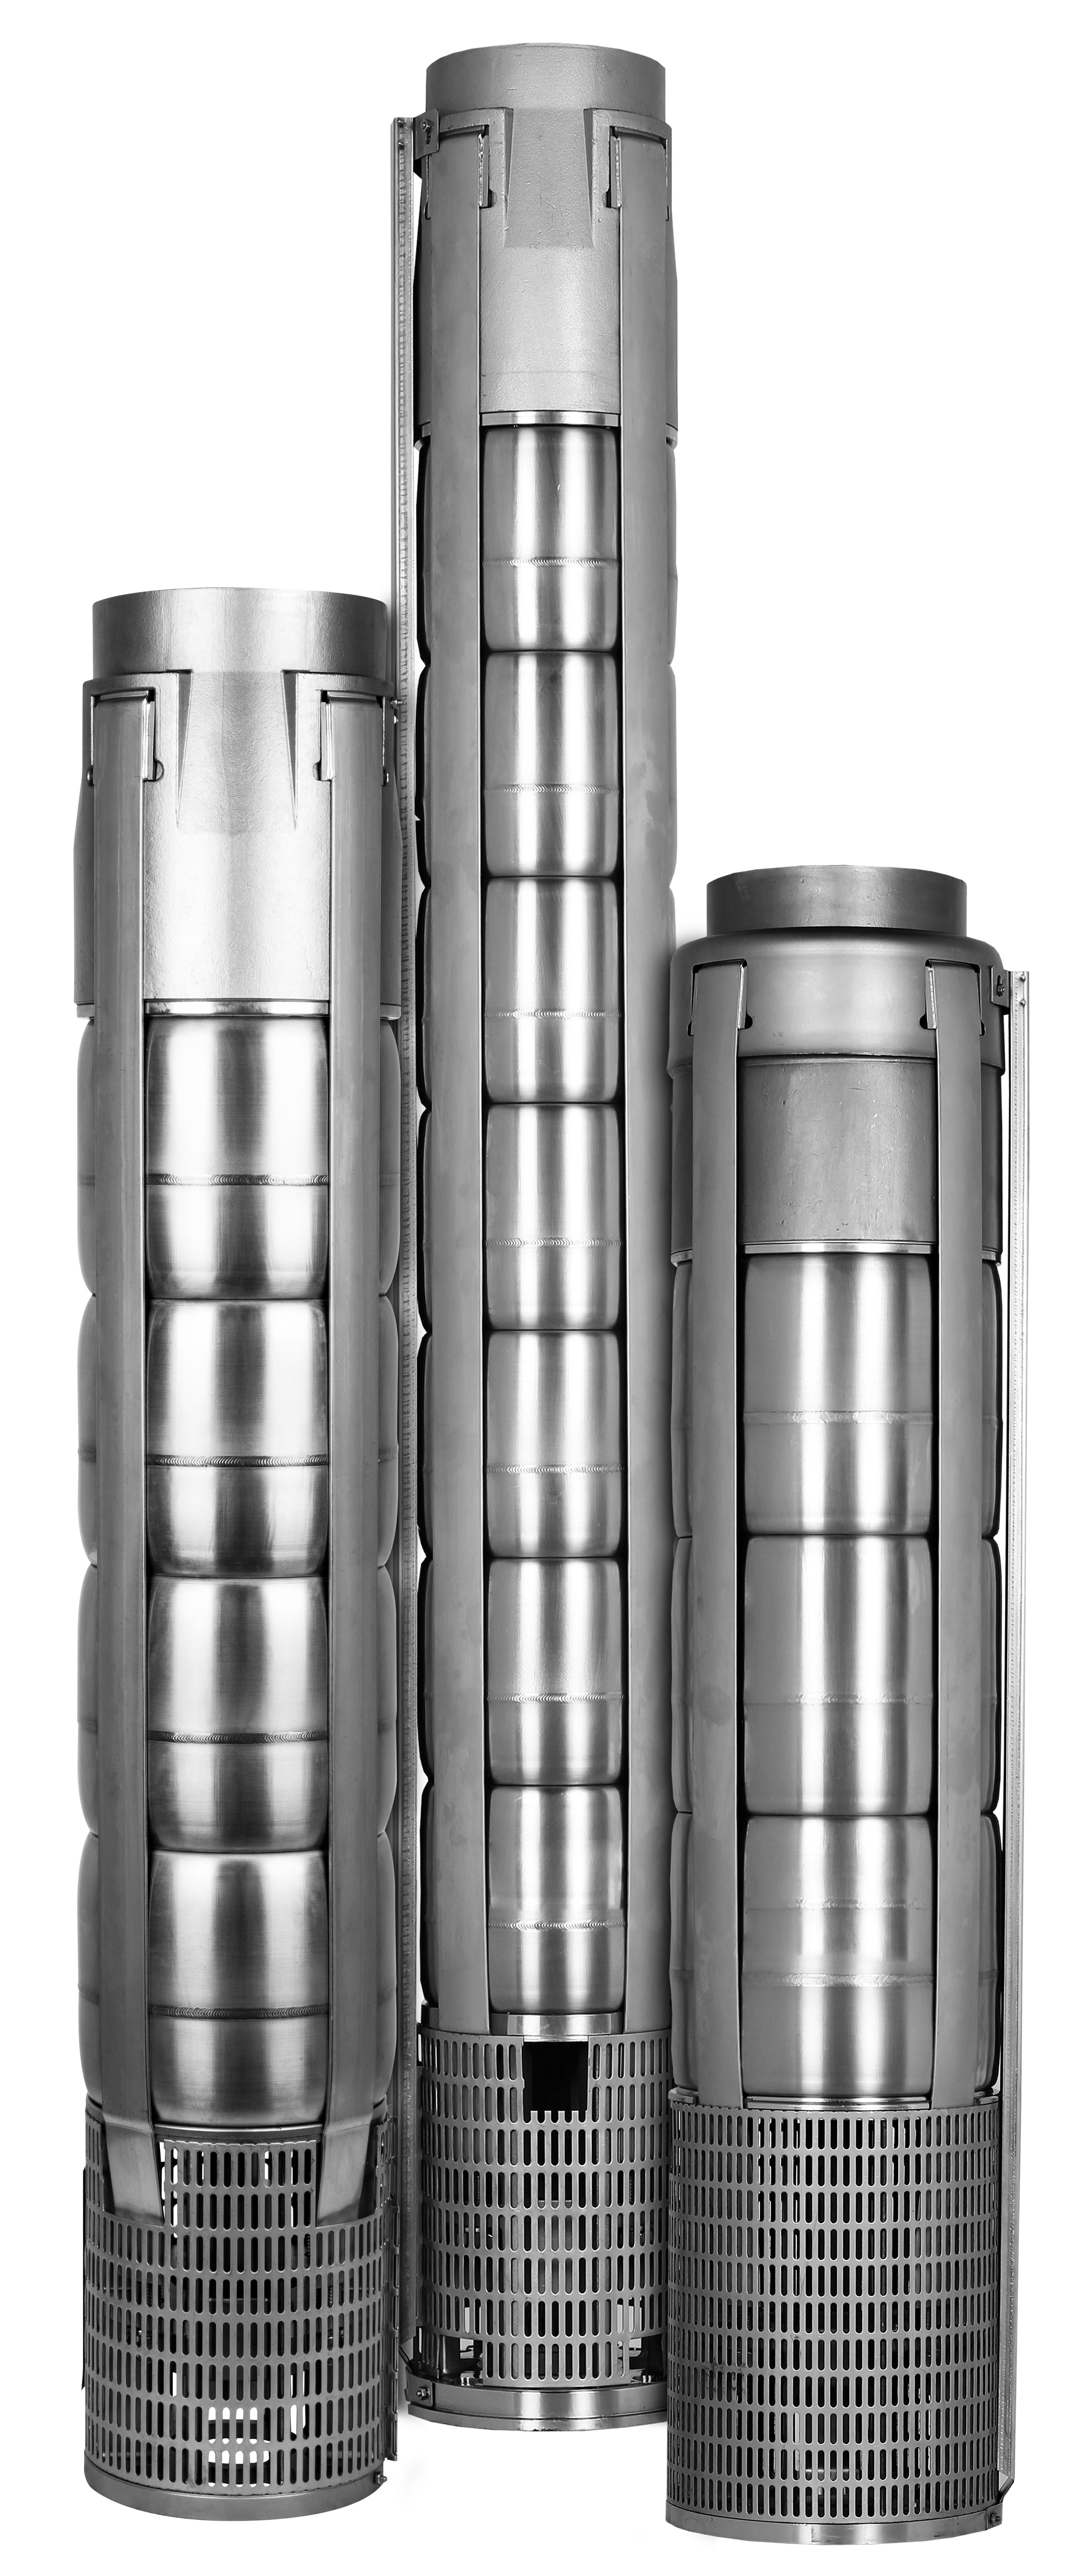 Franklin Electric now offers the SS1 series submersible pumps for harsh applications.